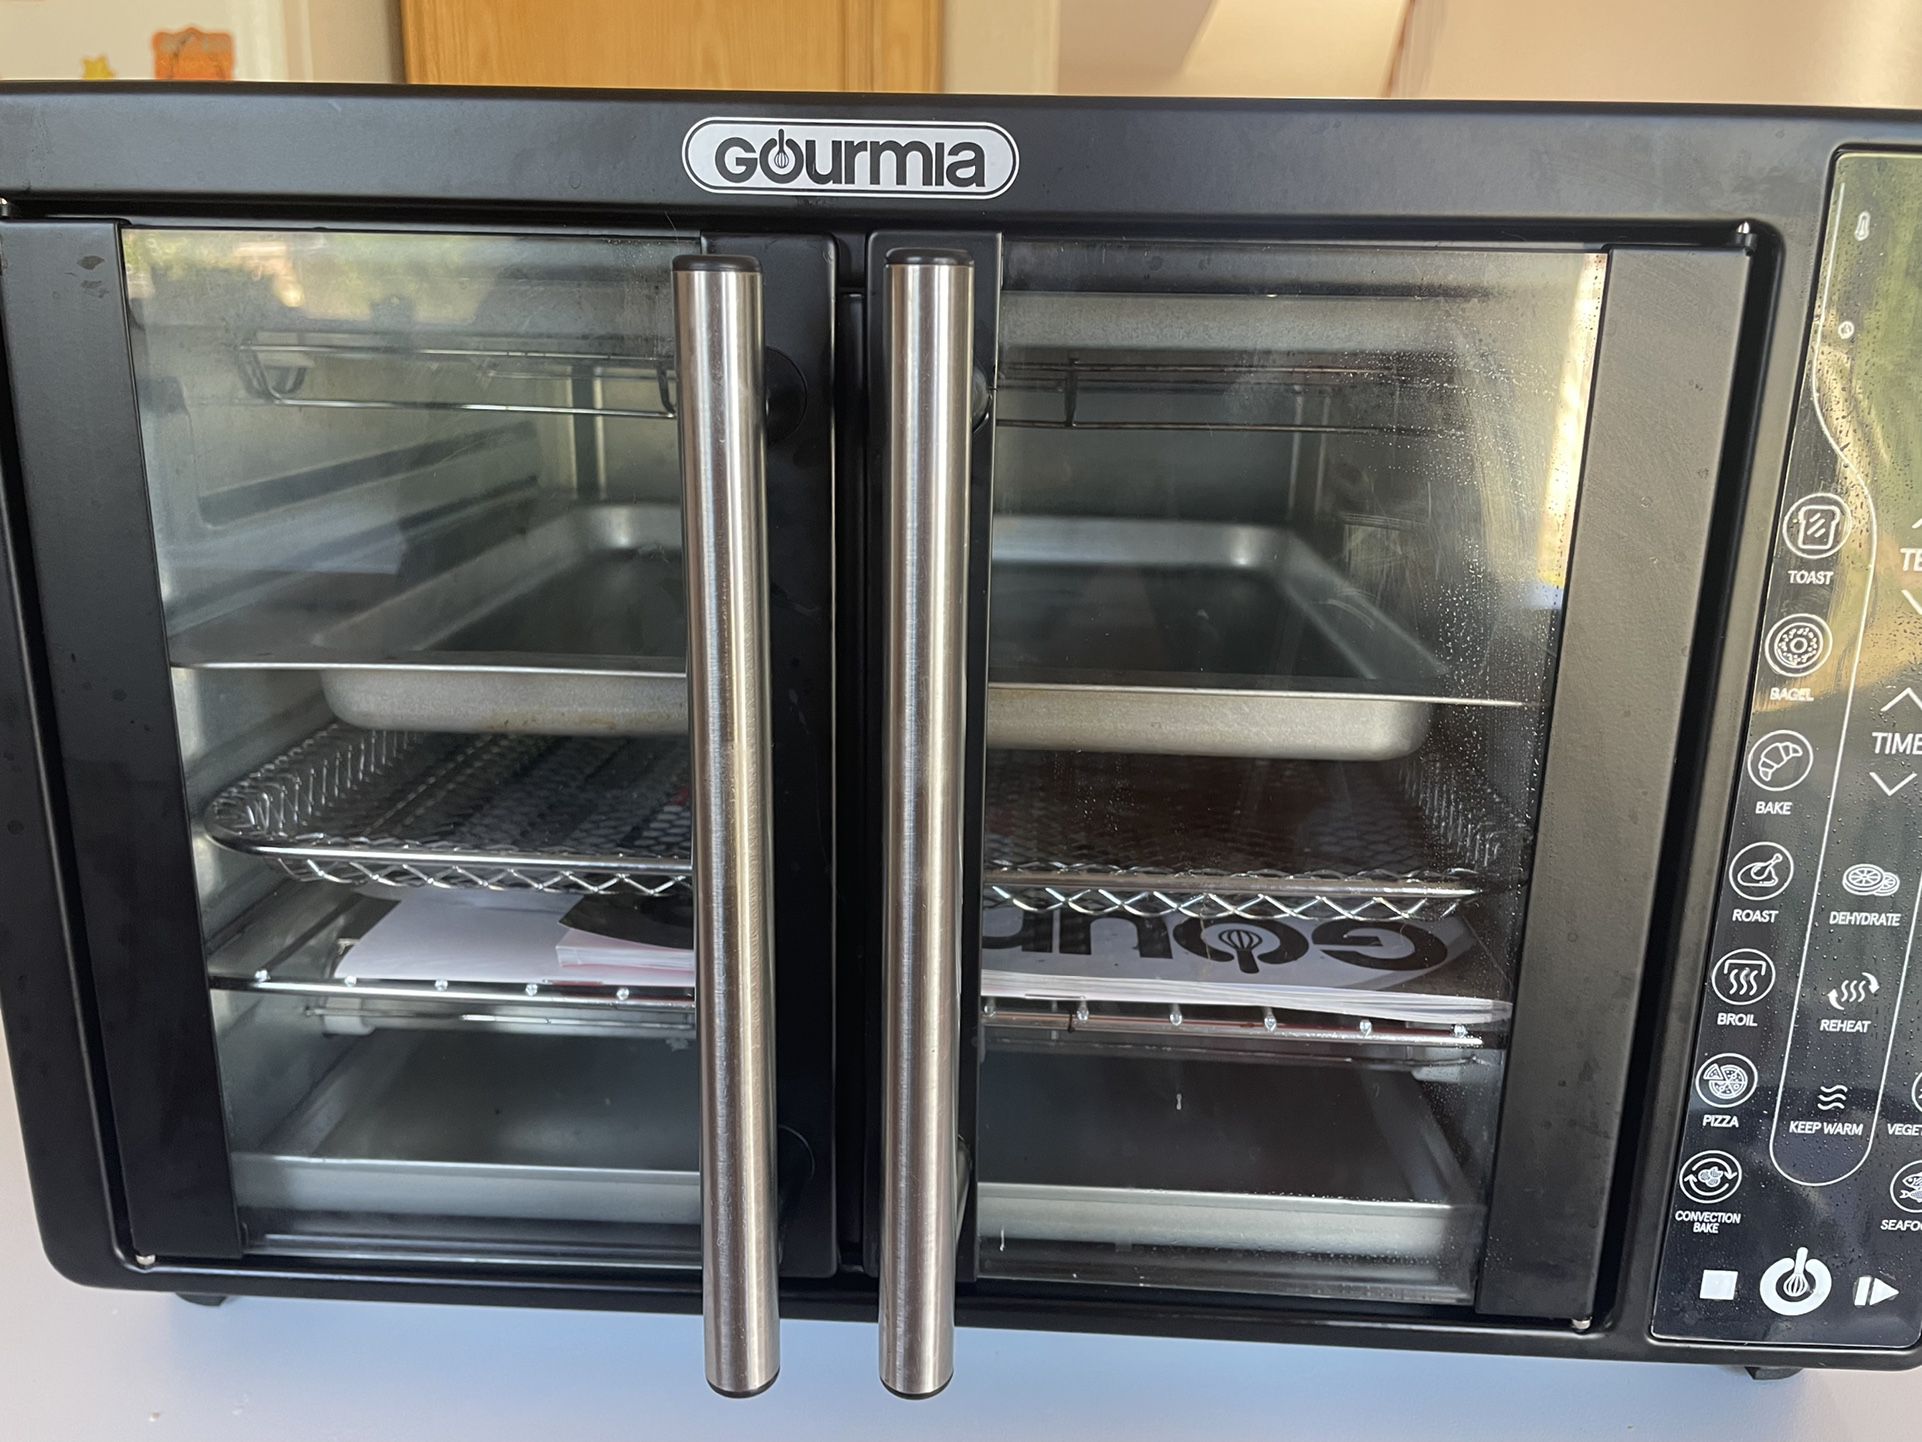 COSORI Smart Air Fryer Toaster Oven, Large 32-Quart, Stainless Steel, *Like  New With Minimal Use* for Sale in Chandler, AZ - OfferUp